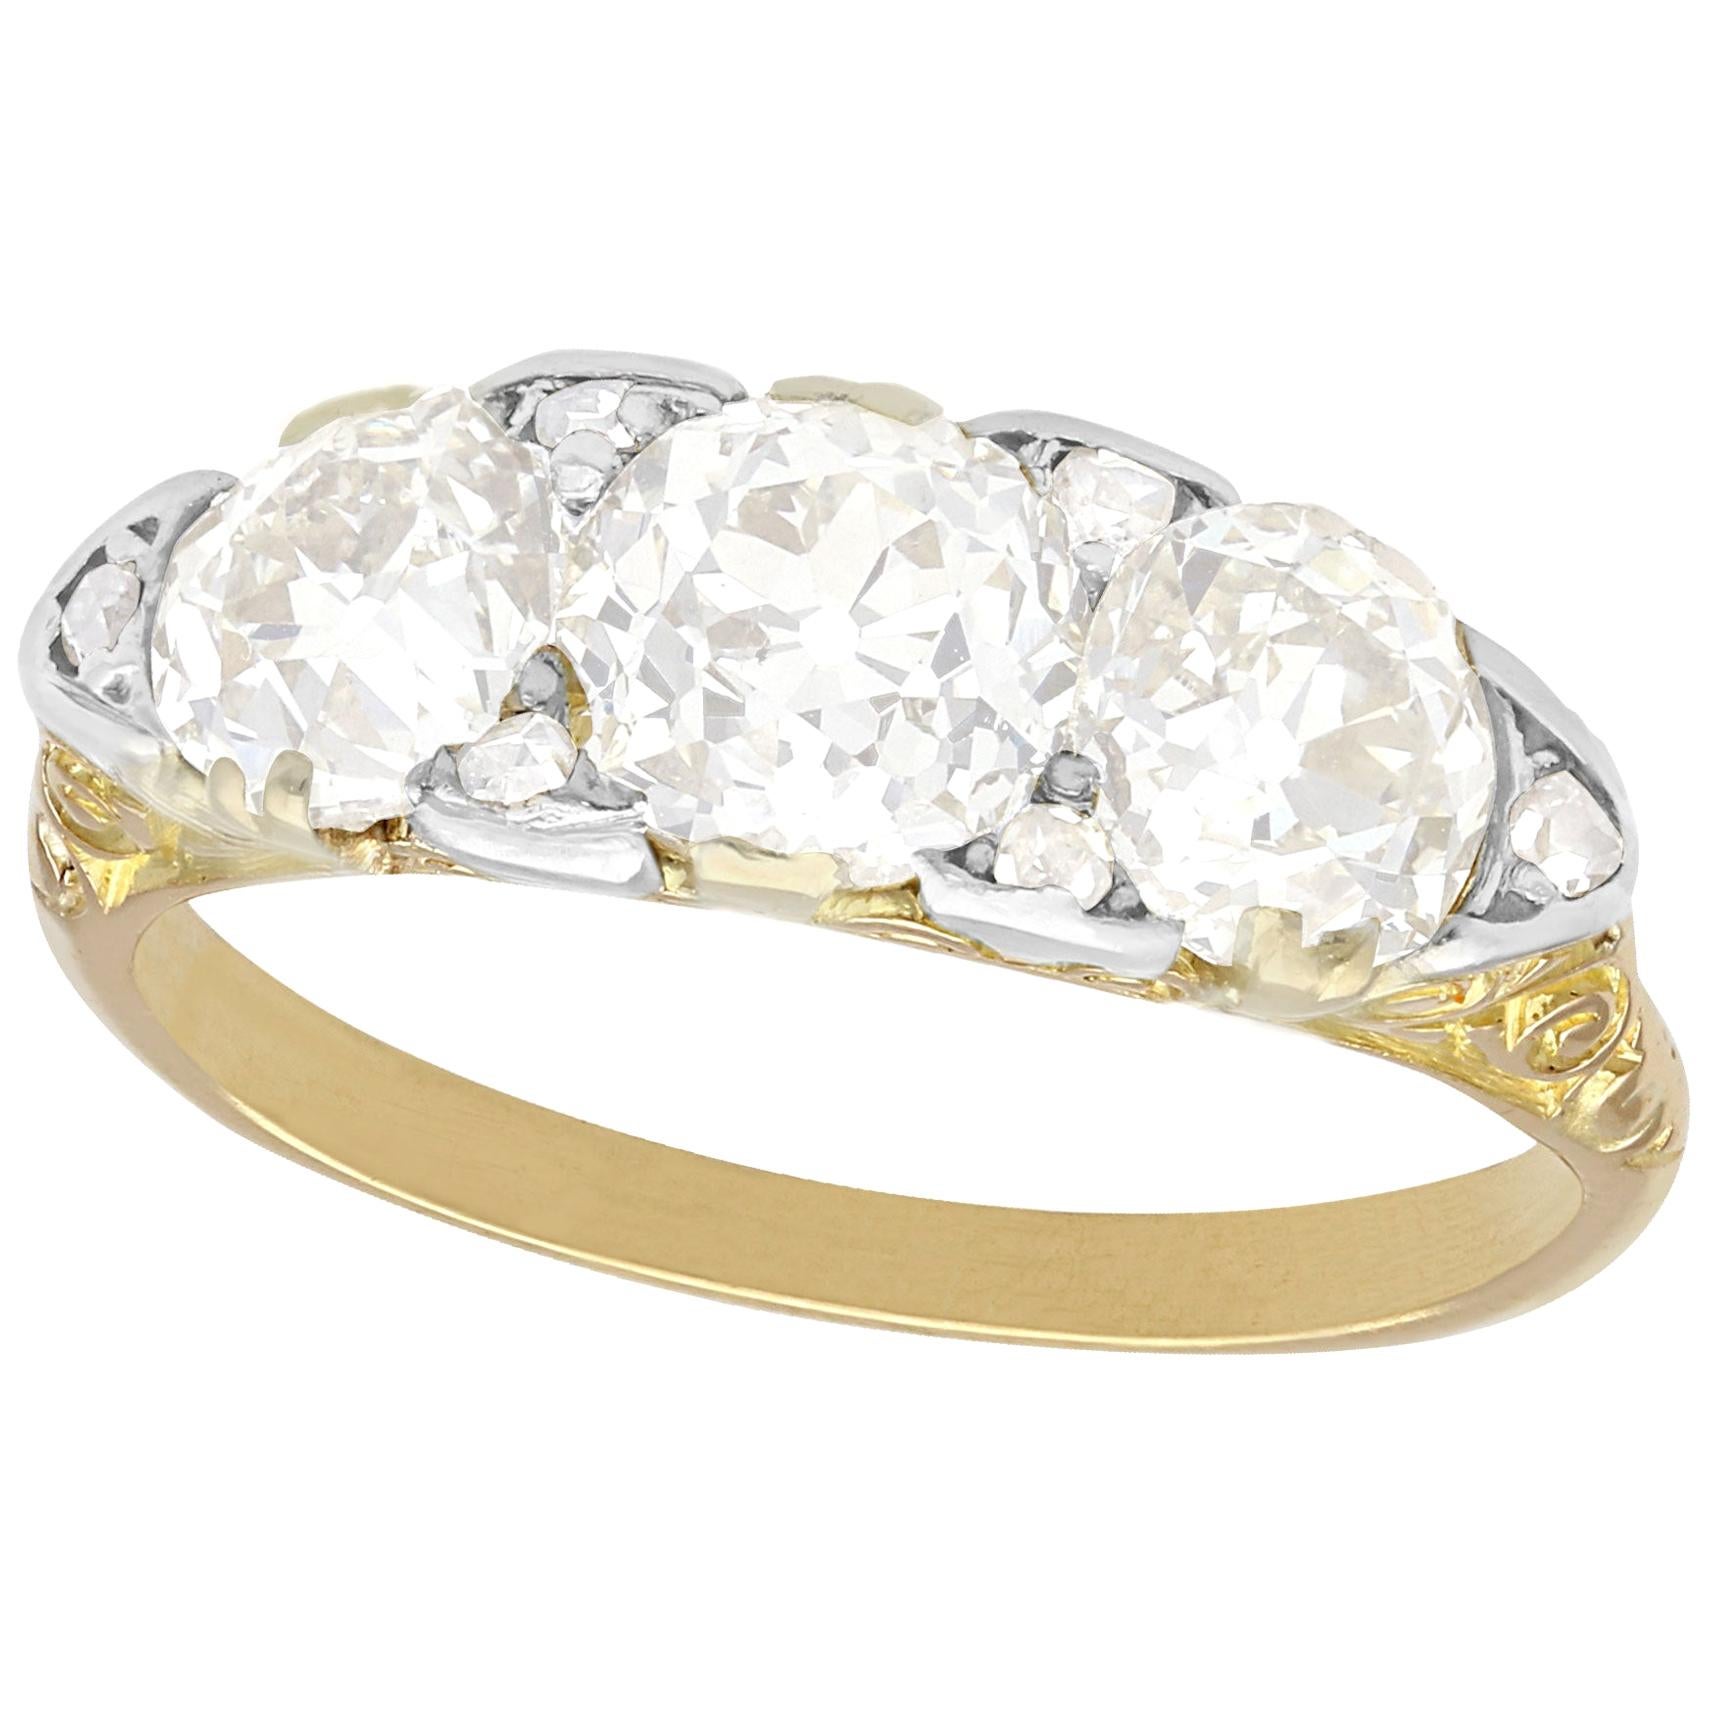 Antique 1910s 2.77 Carat Diamond and Yellow Gold Trilogy Ring